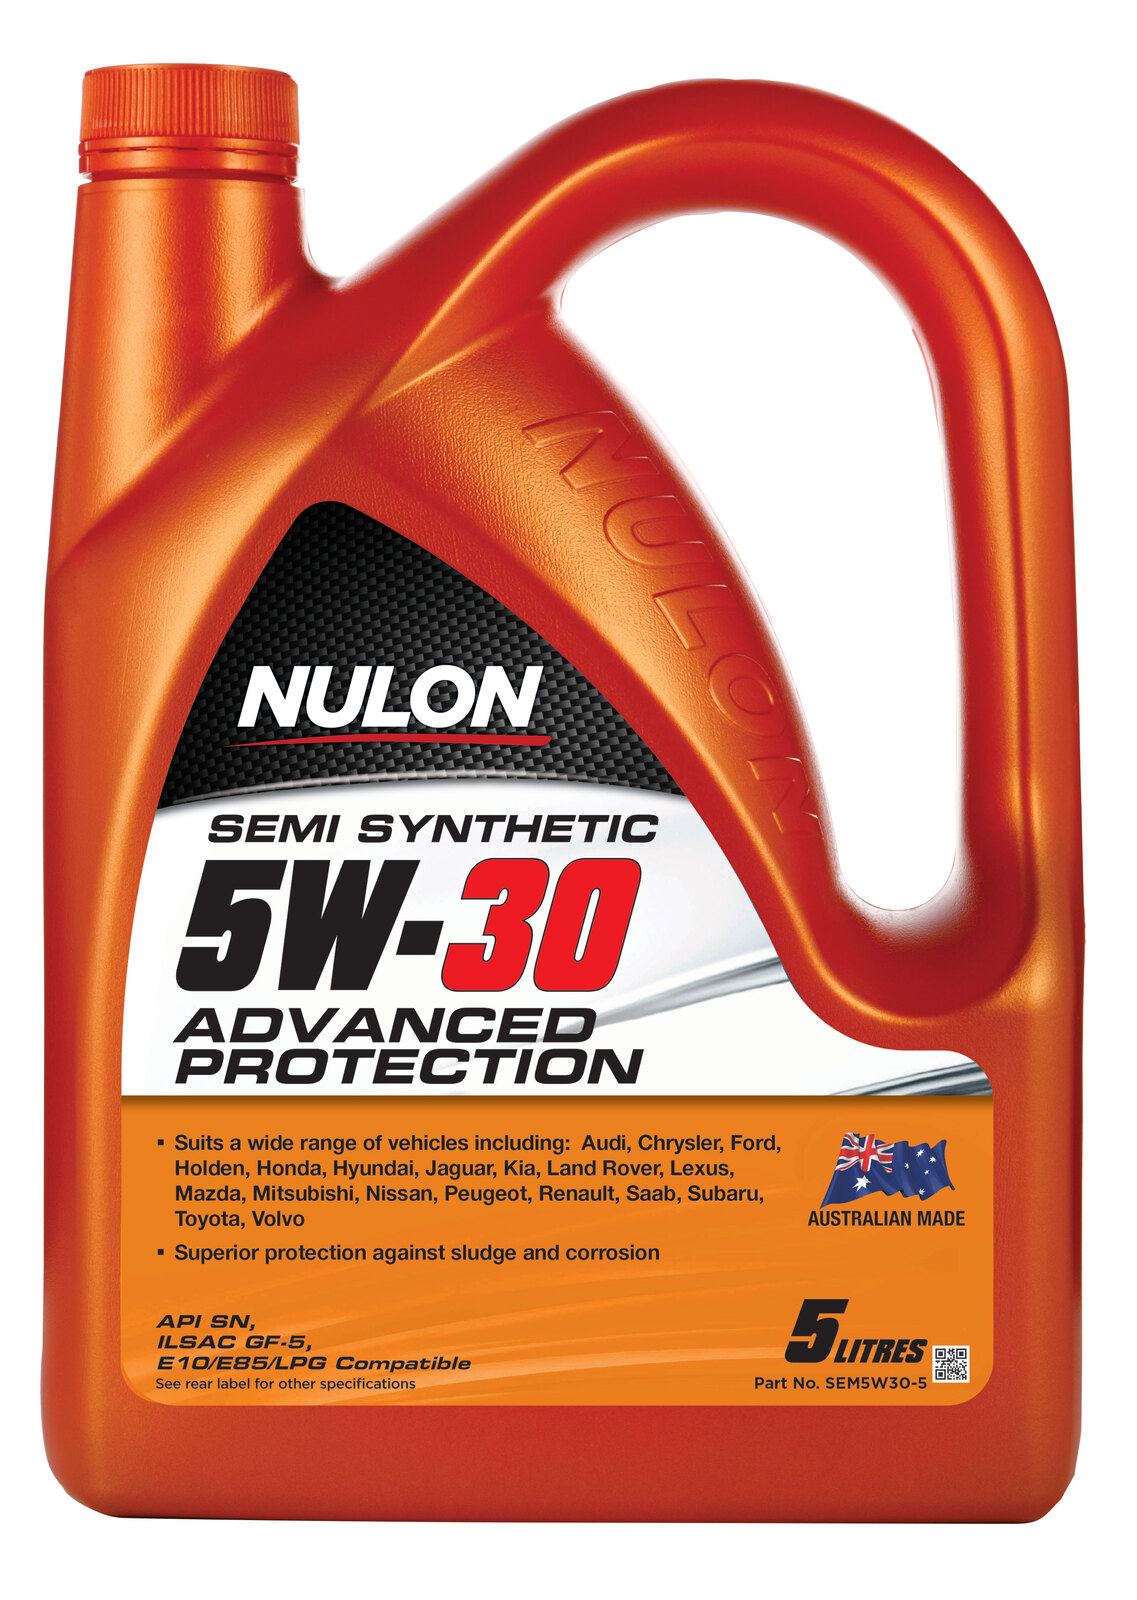 NULON Semi Synthetic Advanced Protection 5W30 Engine, Each